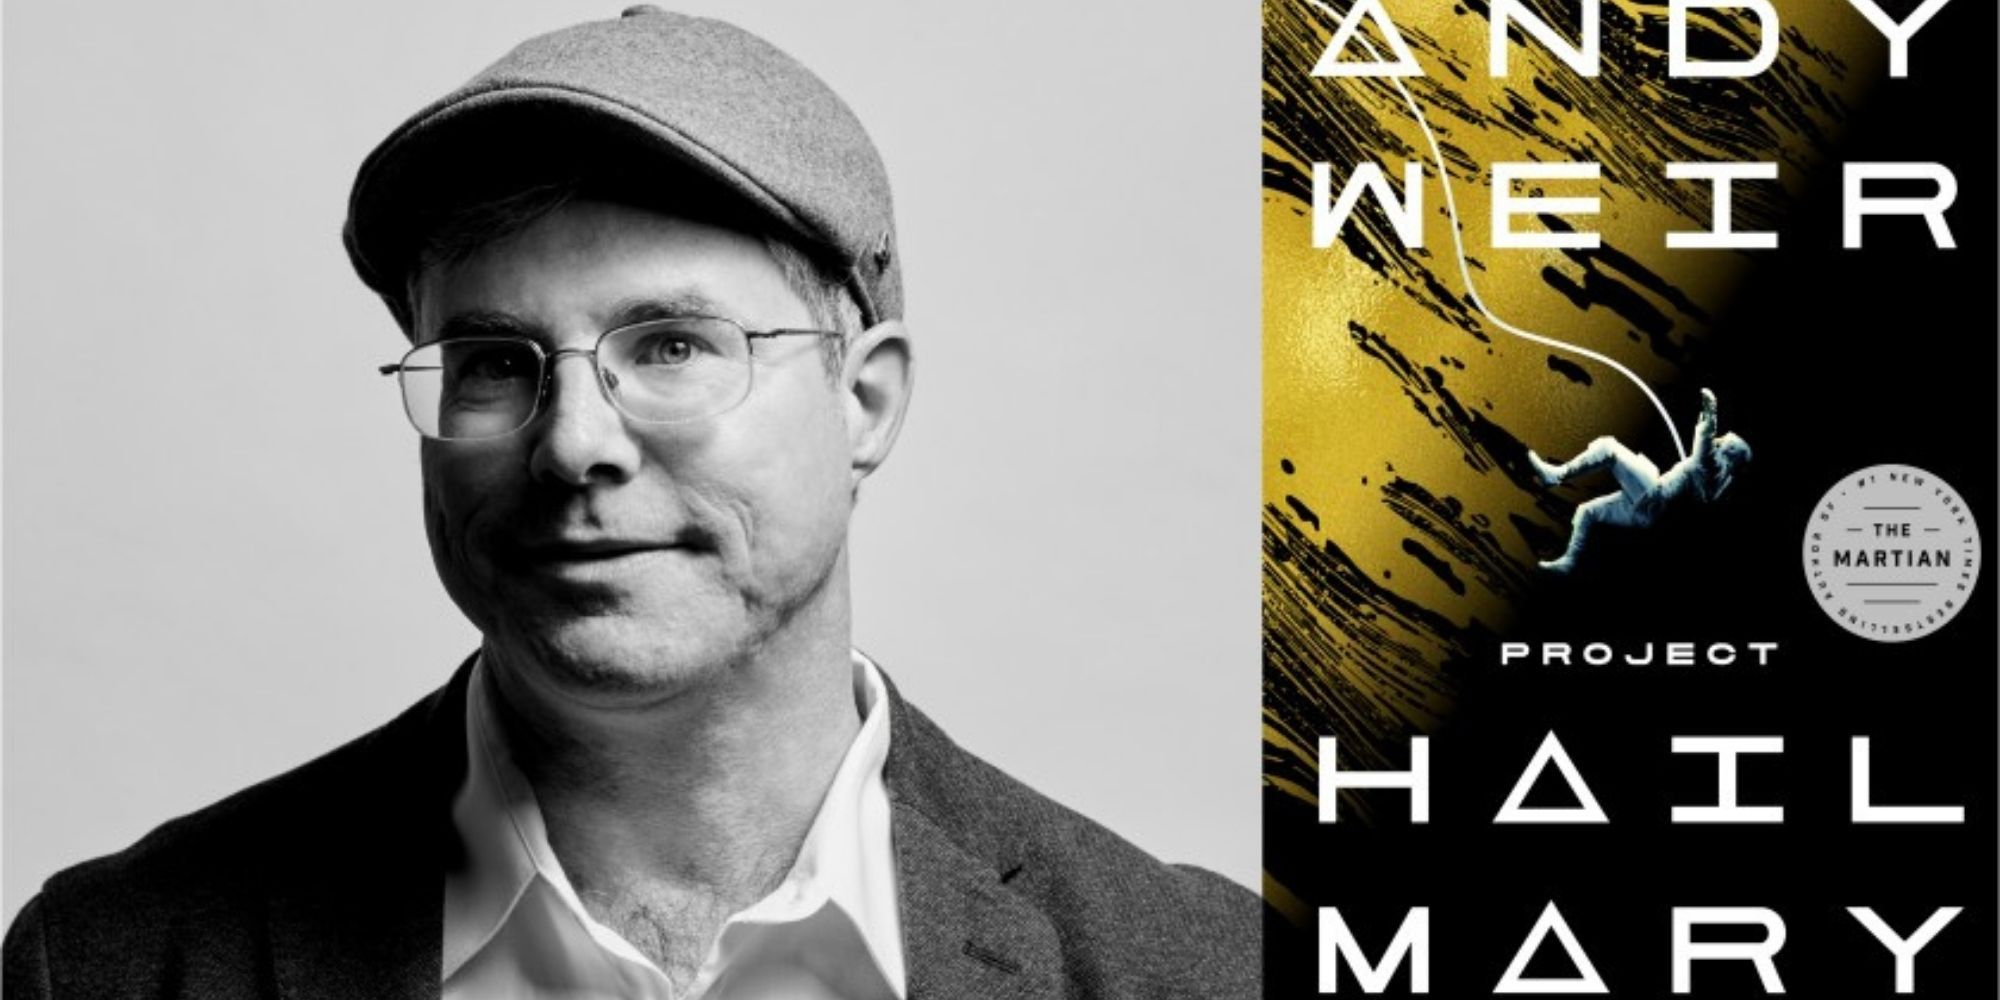 Split image showing author Andy Weir ad his book Project Hail Mary